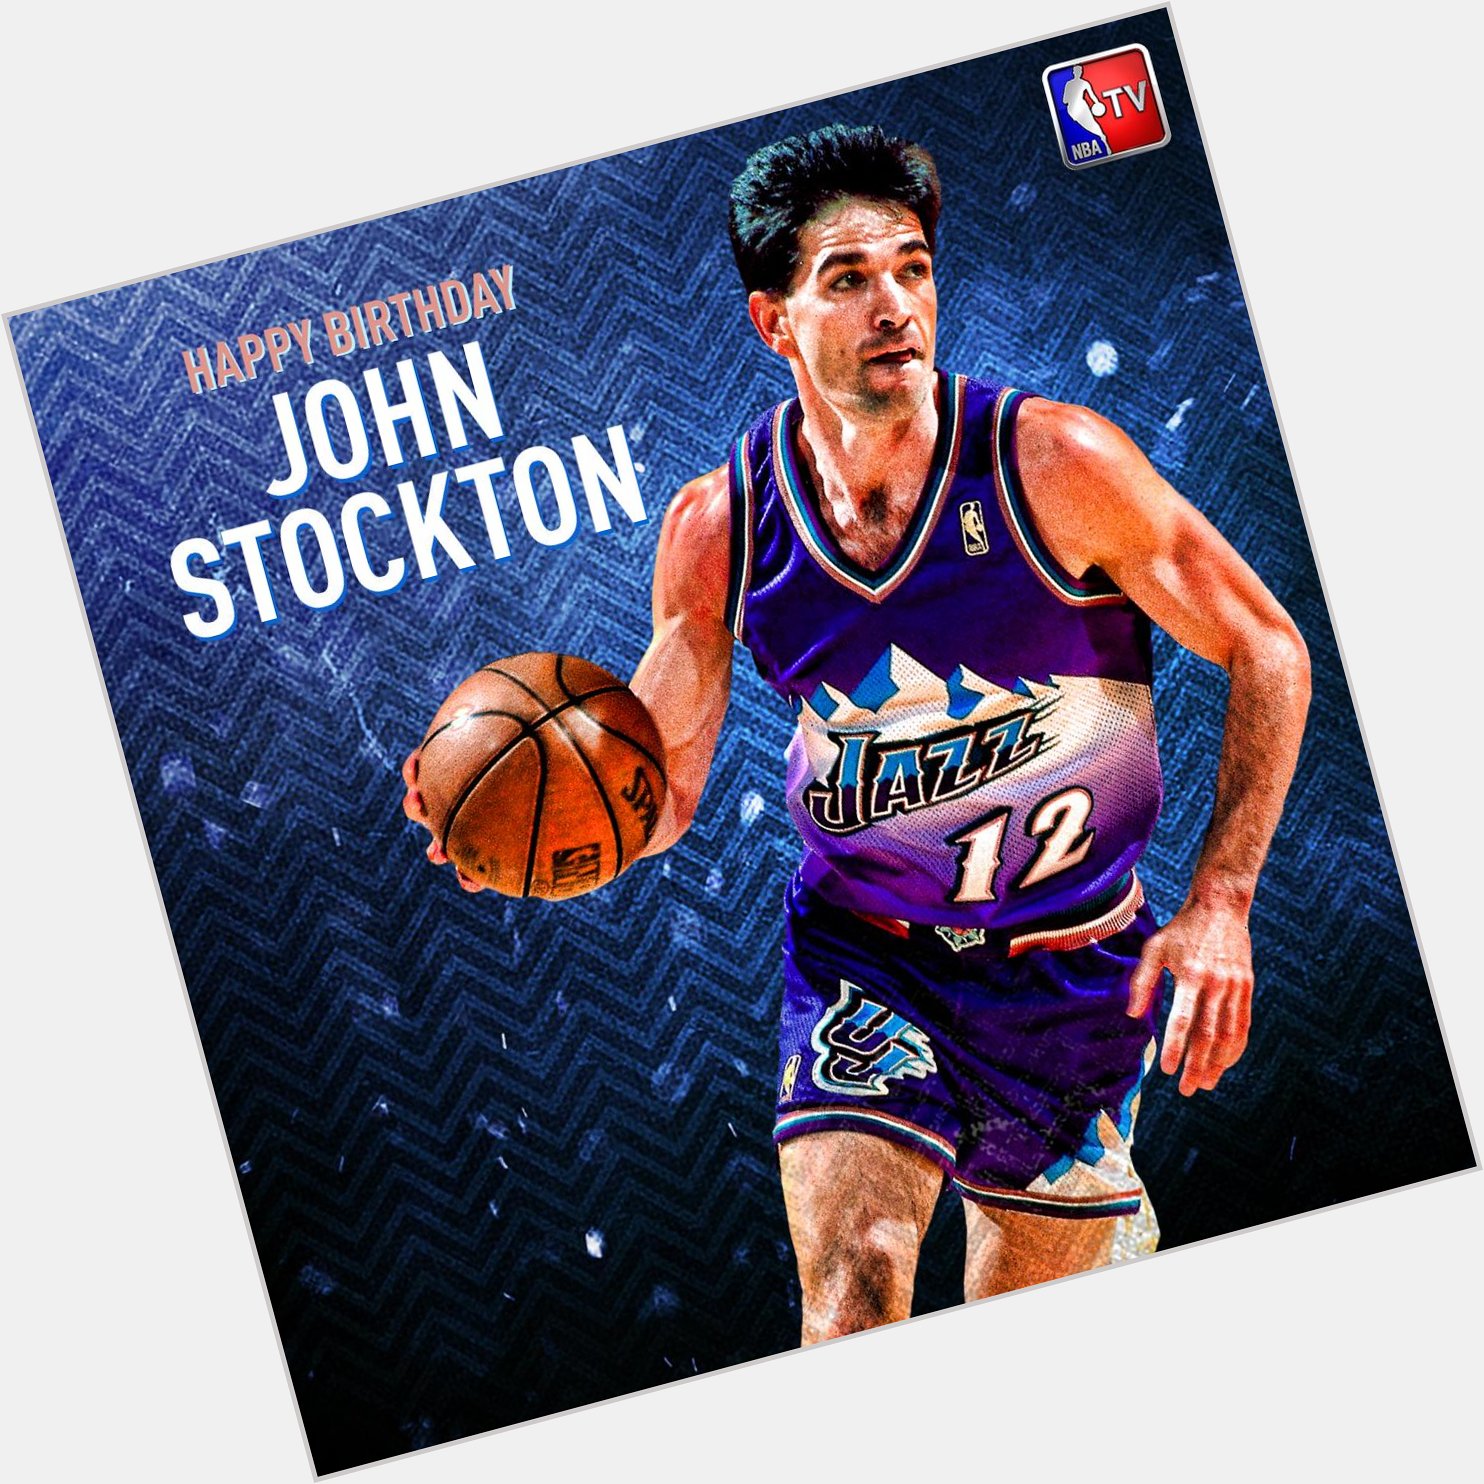 Join us in wishing 10-time All-Star John Stockton a Happy Birthday! 